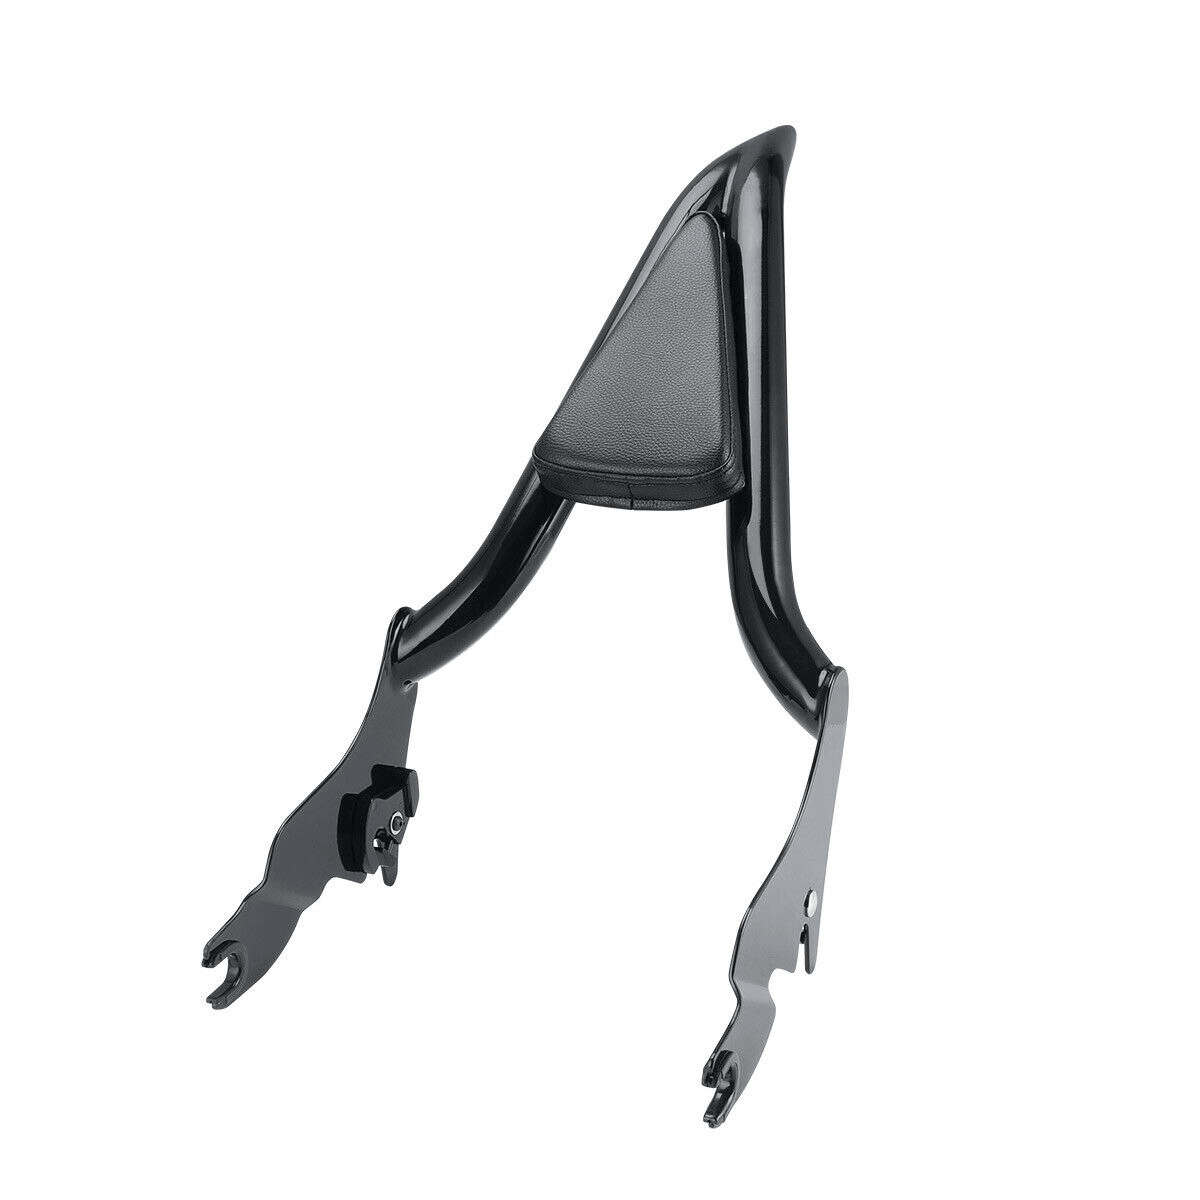 16" Tall Backrest Sissy Bar For Harley CVO Road Glide Street Touring Road King - Moto Life Products